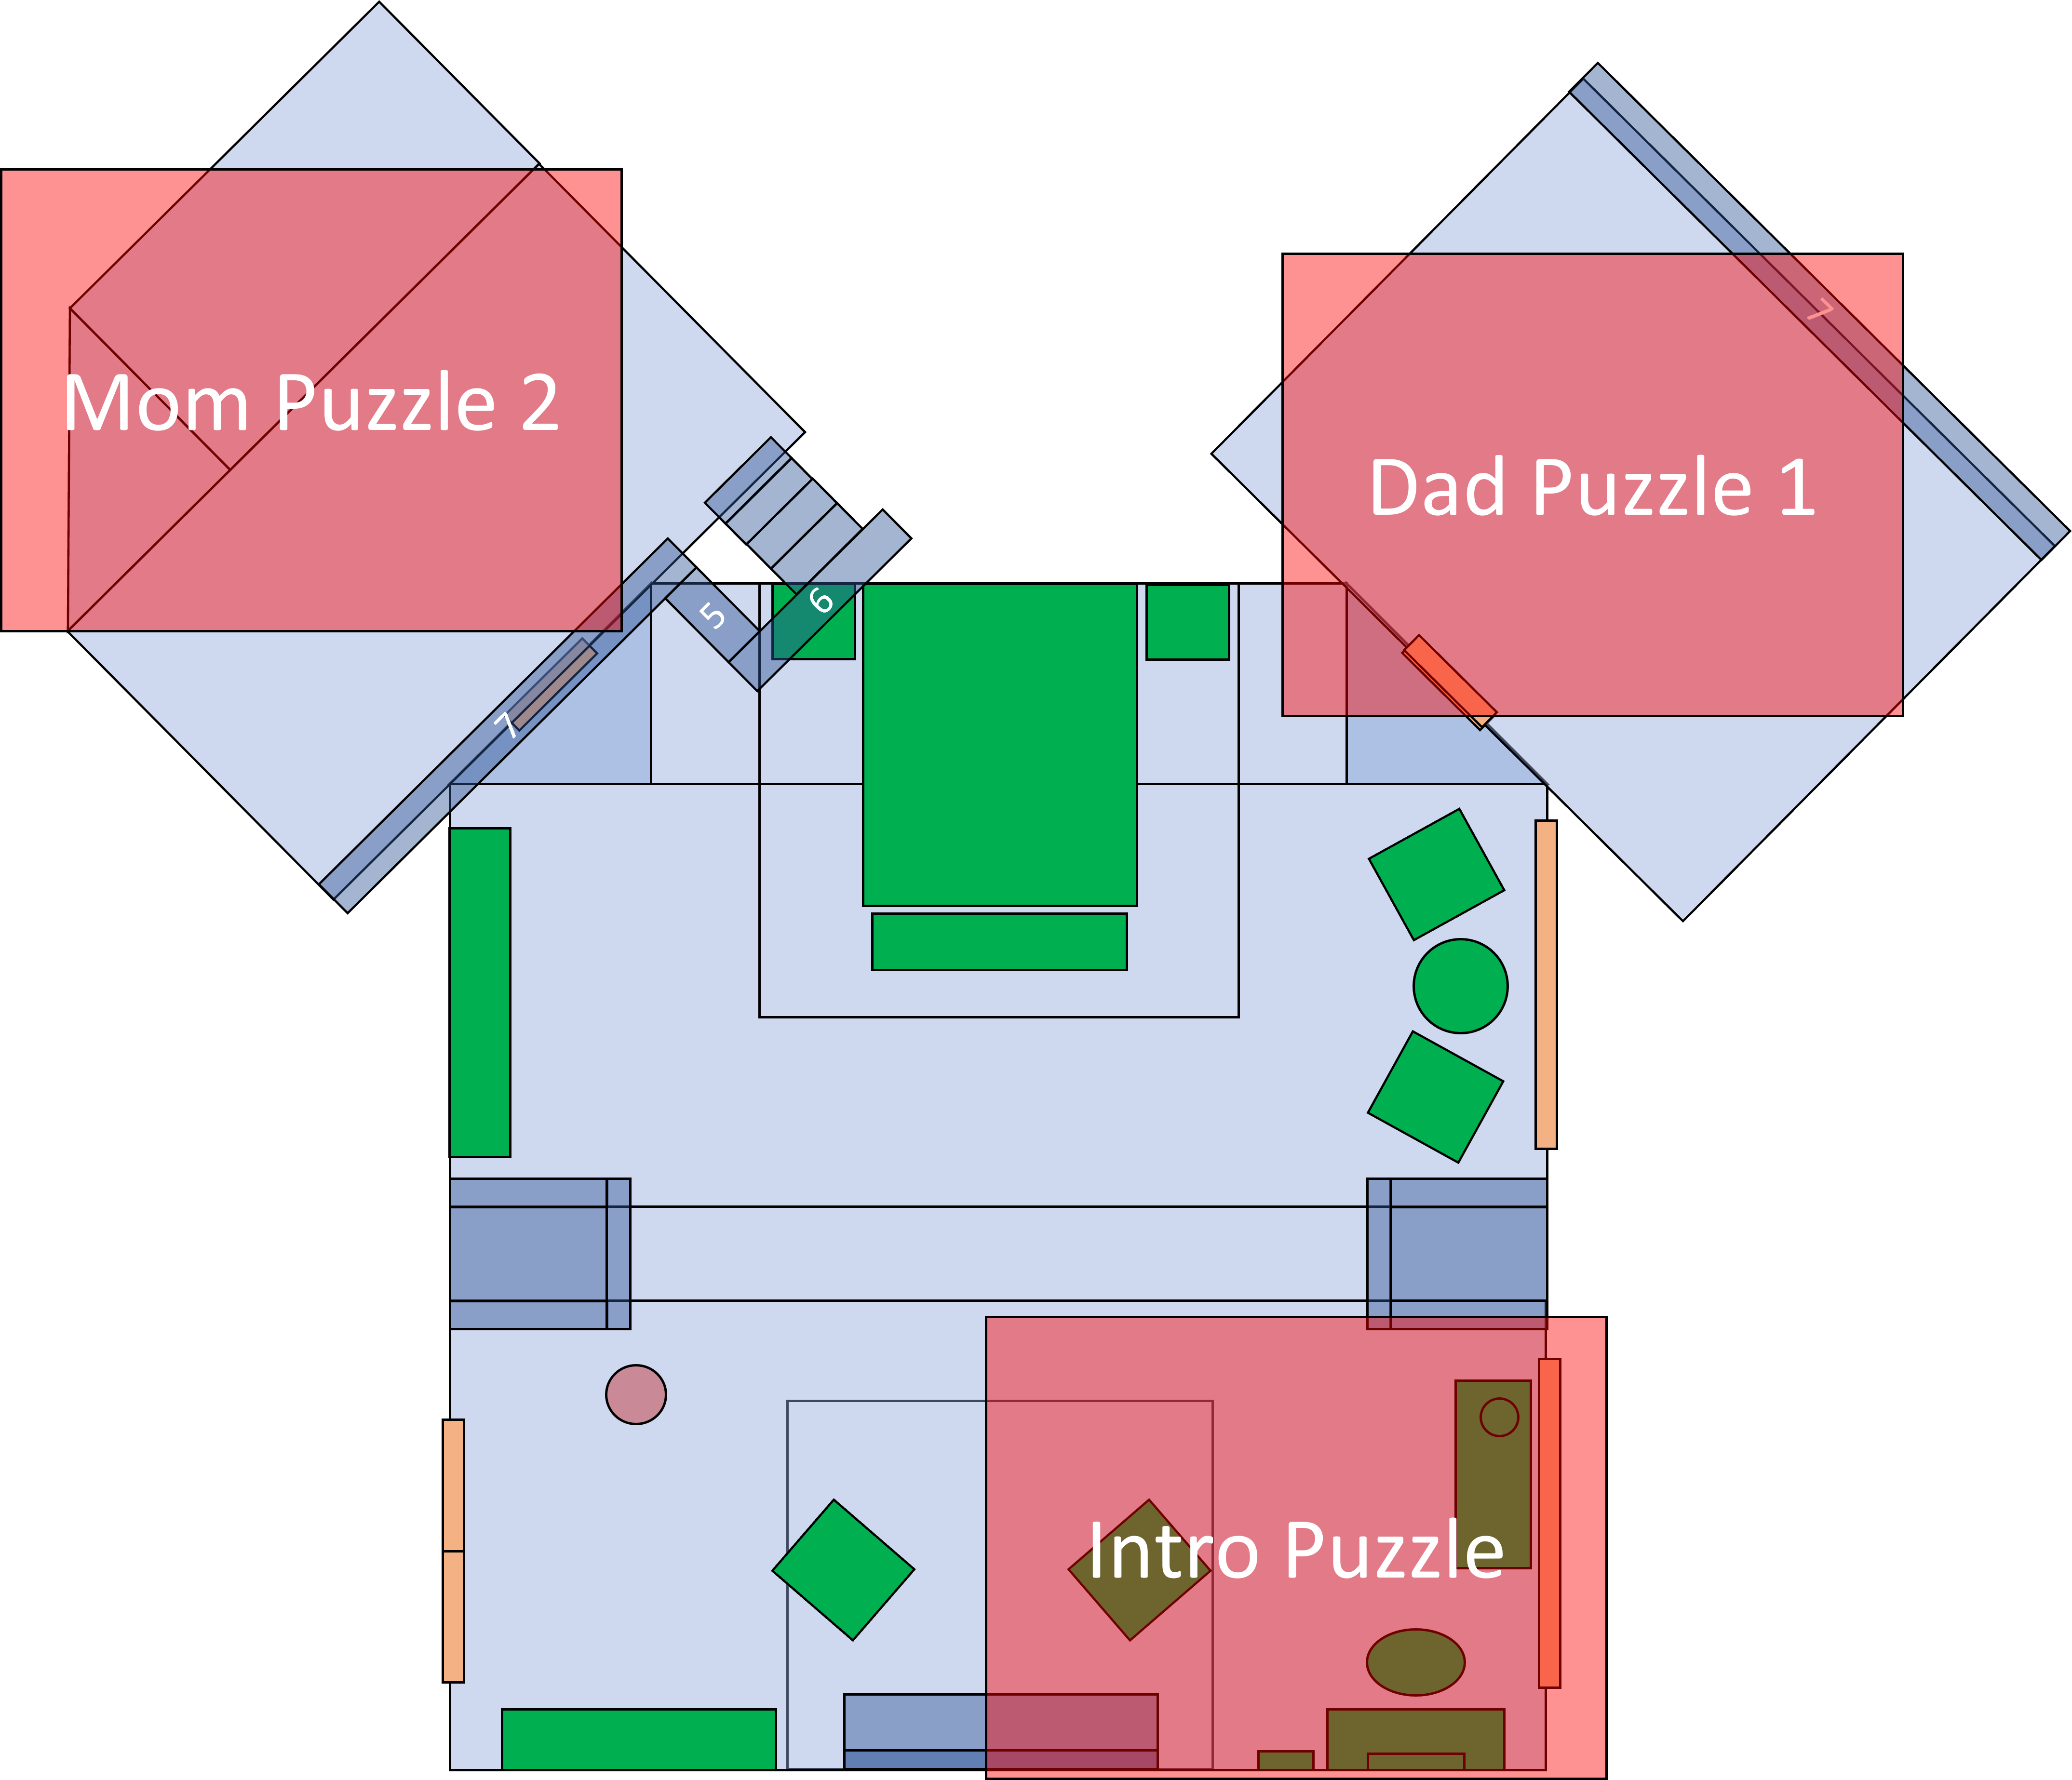 Scope-Reduced Puzzles